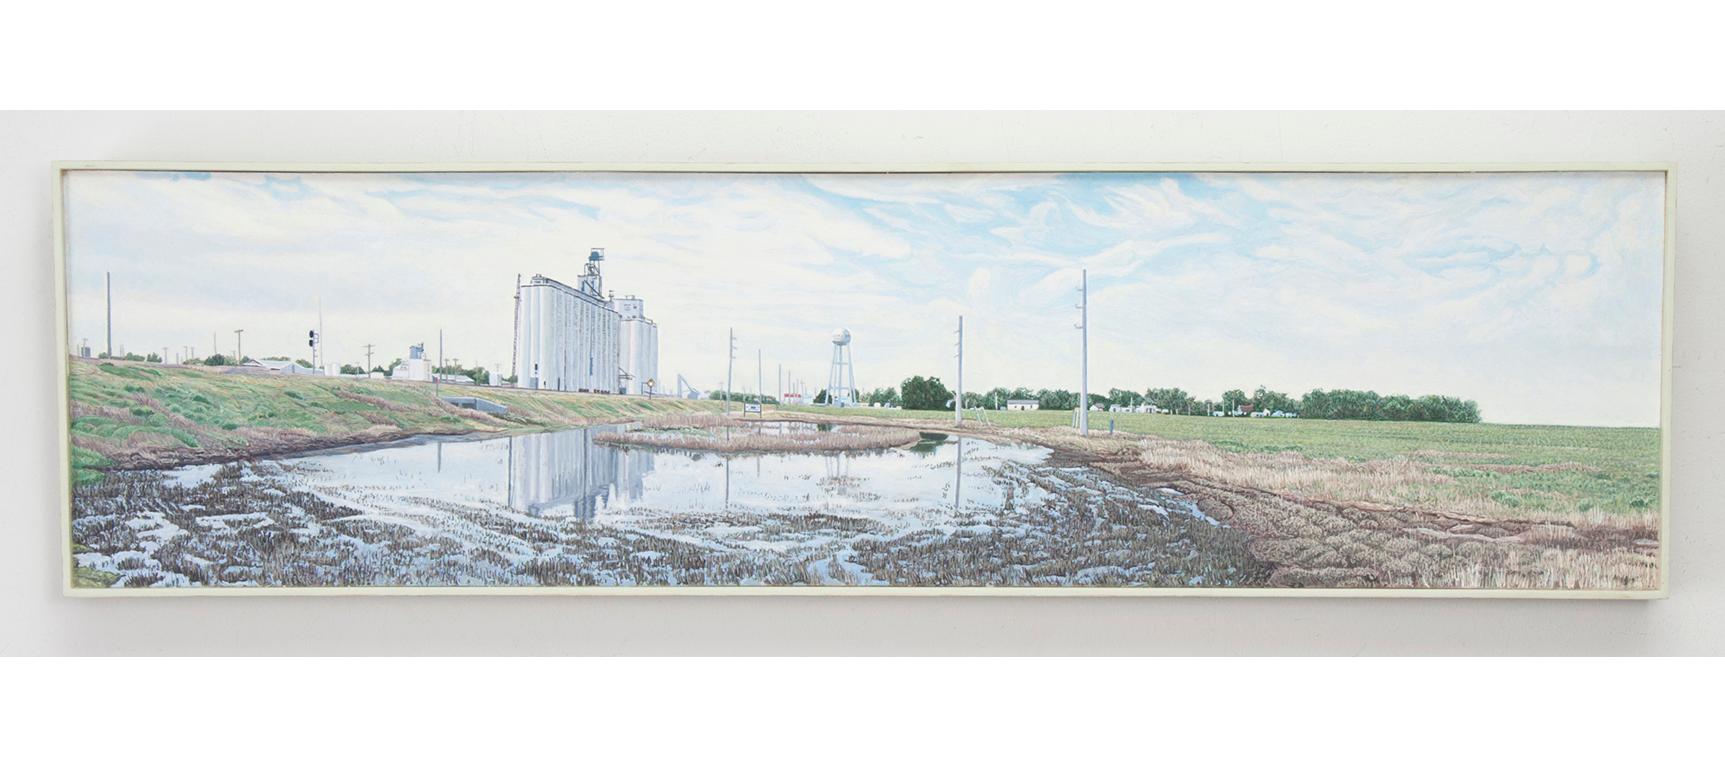 Large Puddle, Offerle, Kansas, US Highway 50 - Painting by Lloyd Brown